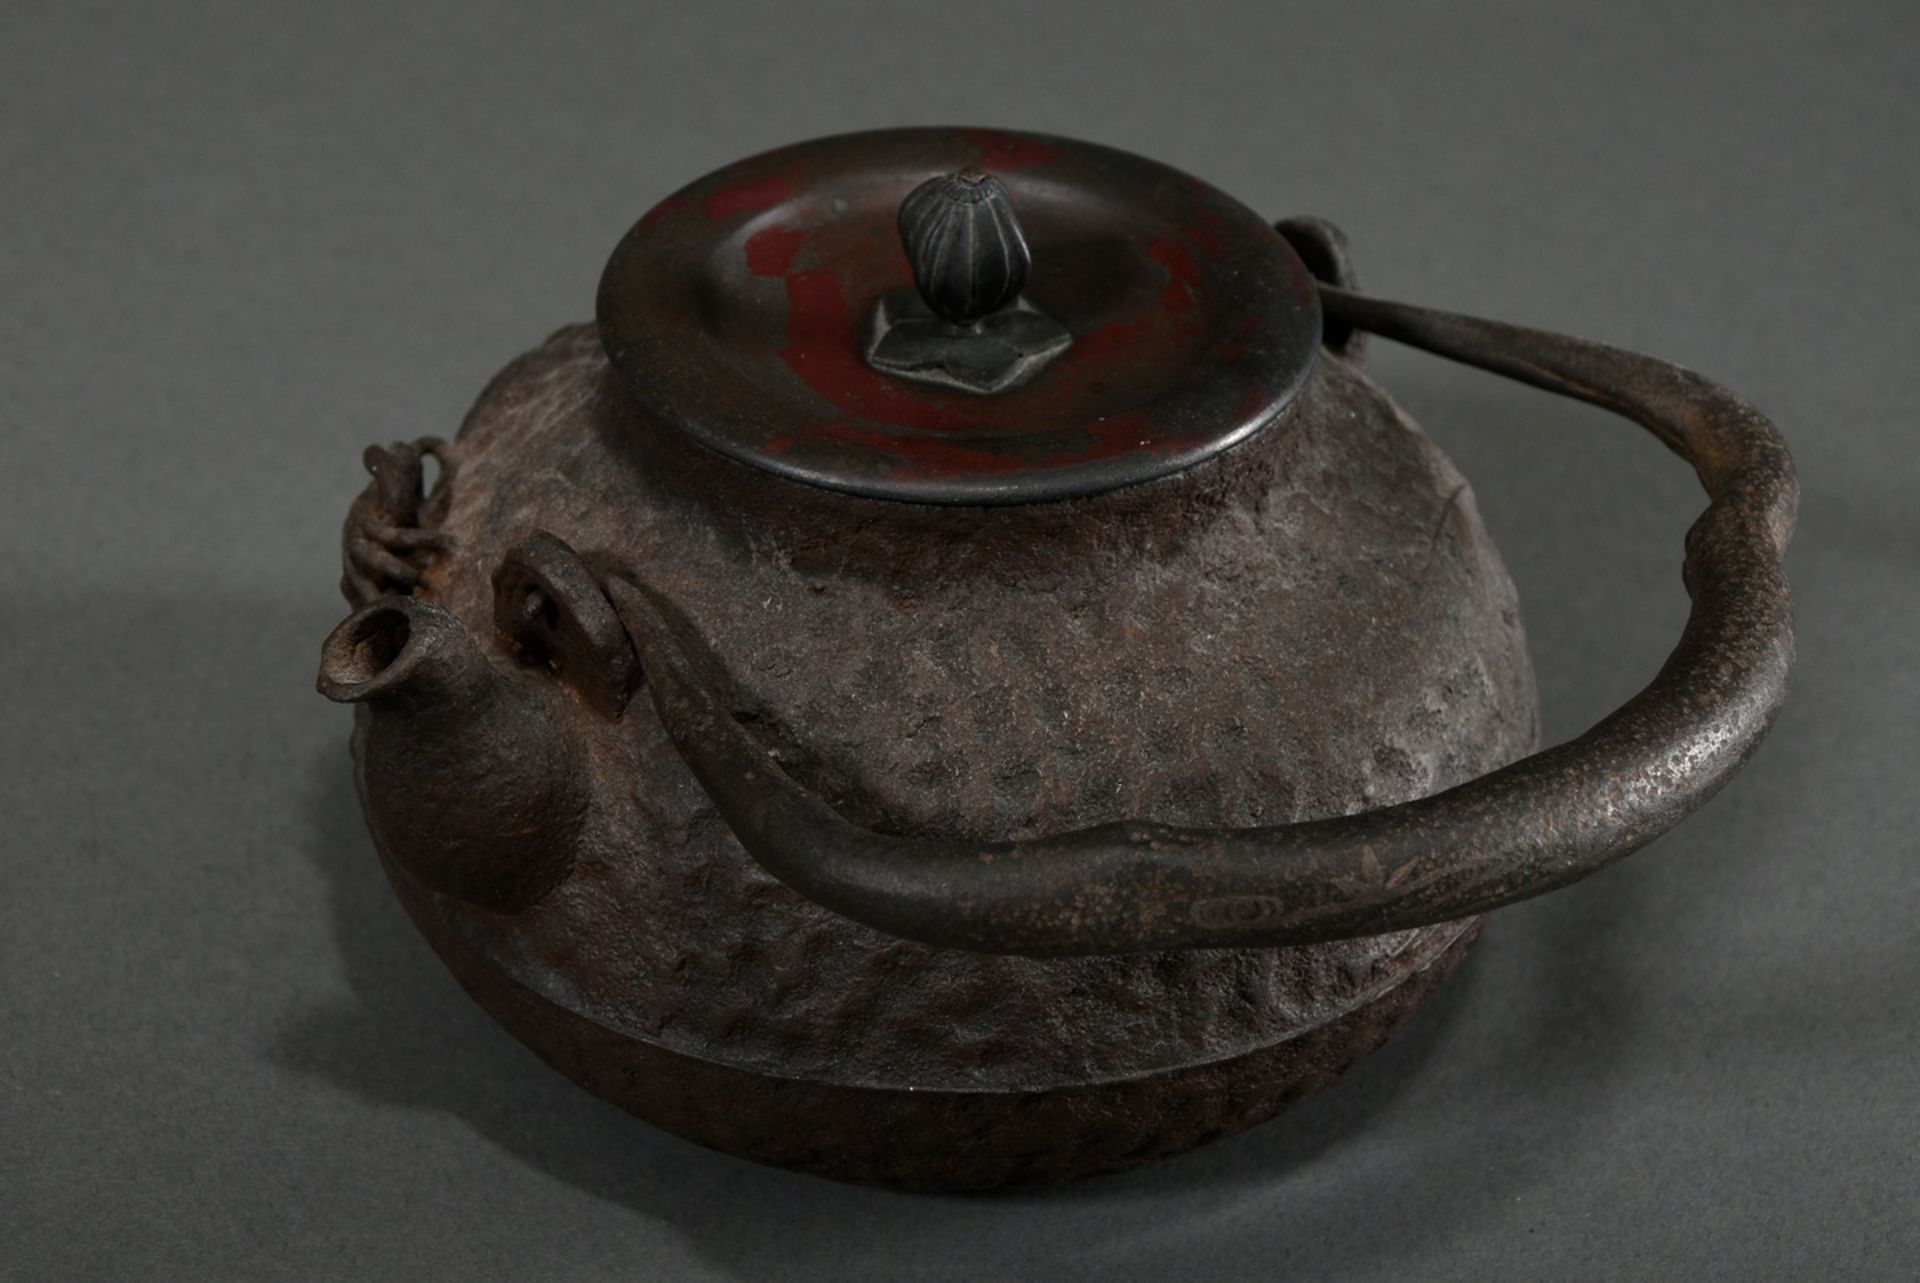 Iron Tetsubin water kettle "Two crabs and sedge", bronze lid signed inside, Japan 19th/20th c., h. - Image 5 of 9